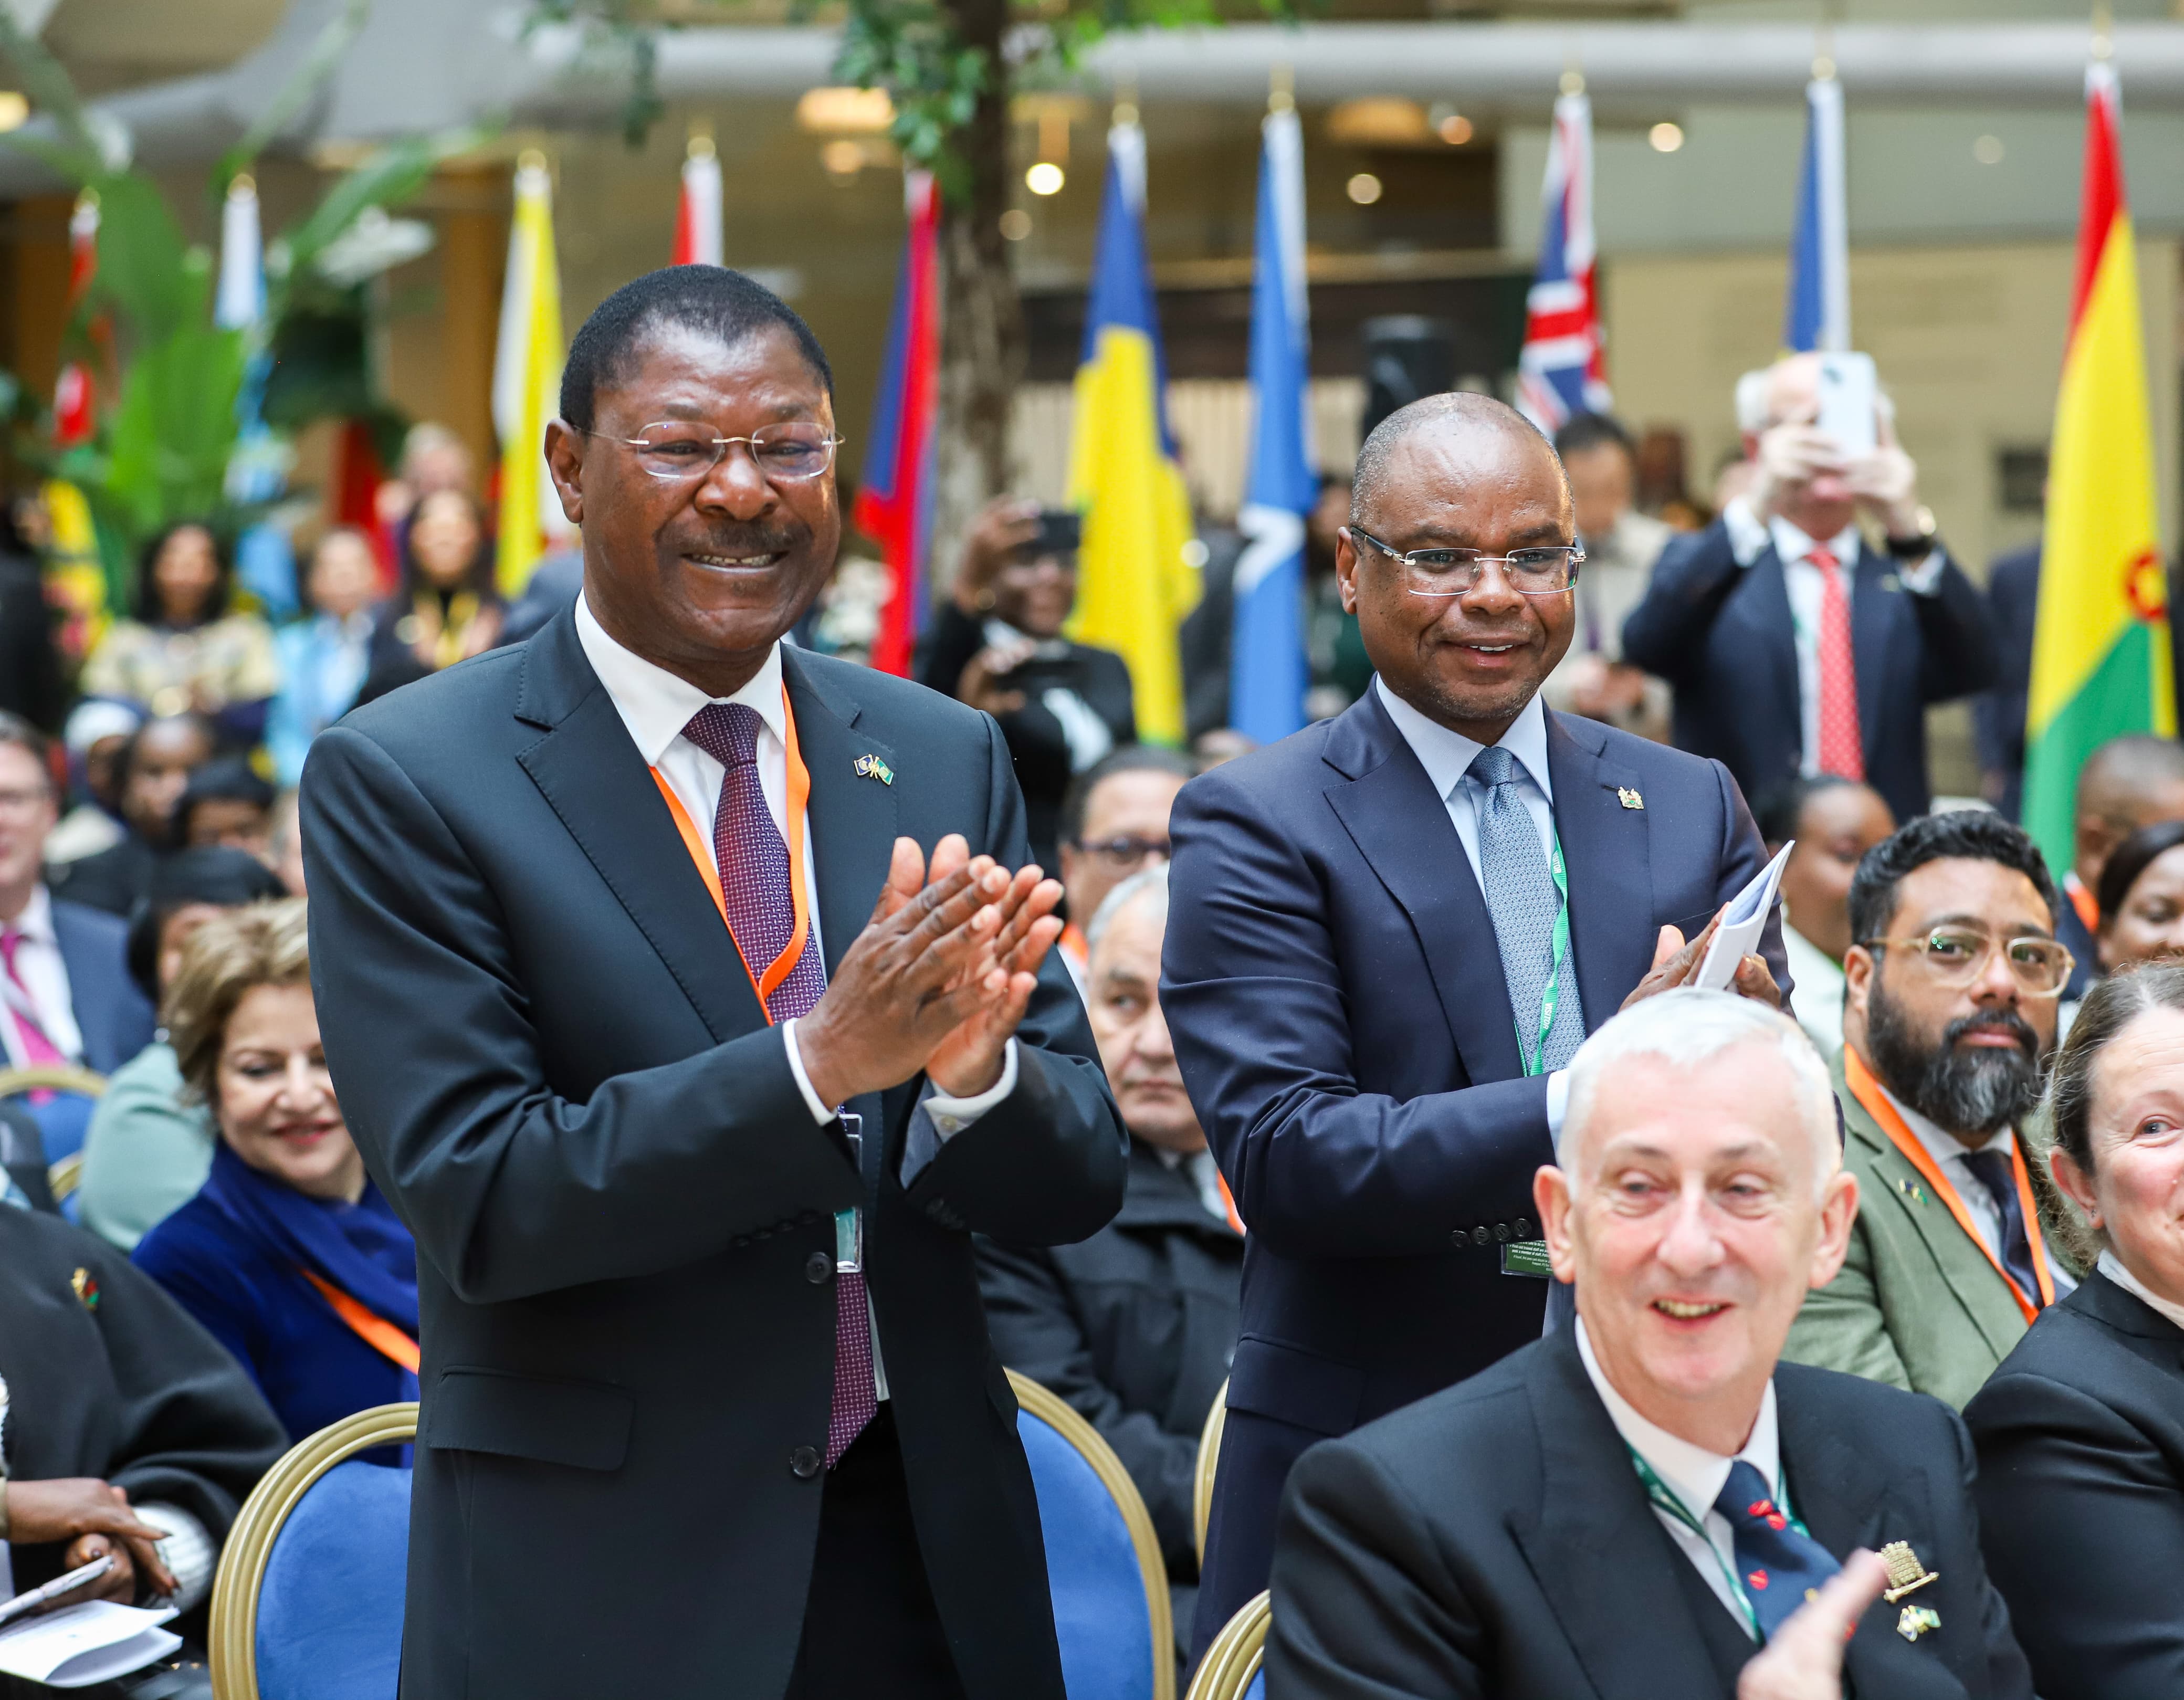 The Speaker of the National Assembly, the Rt. Hon. Moses Wetang’ula and his Senate counterpart, Hon. Amason Kingi during the 75th Commonwealth Anniversary at the Commonwealth House, London.